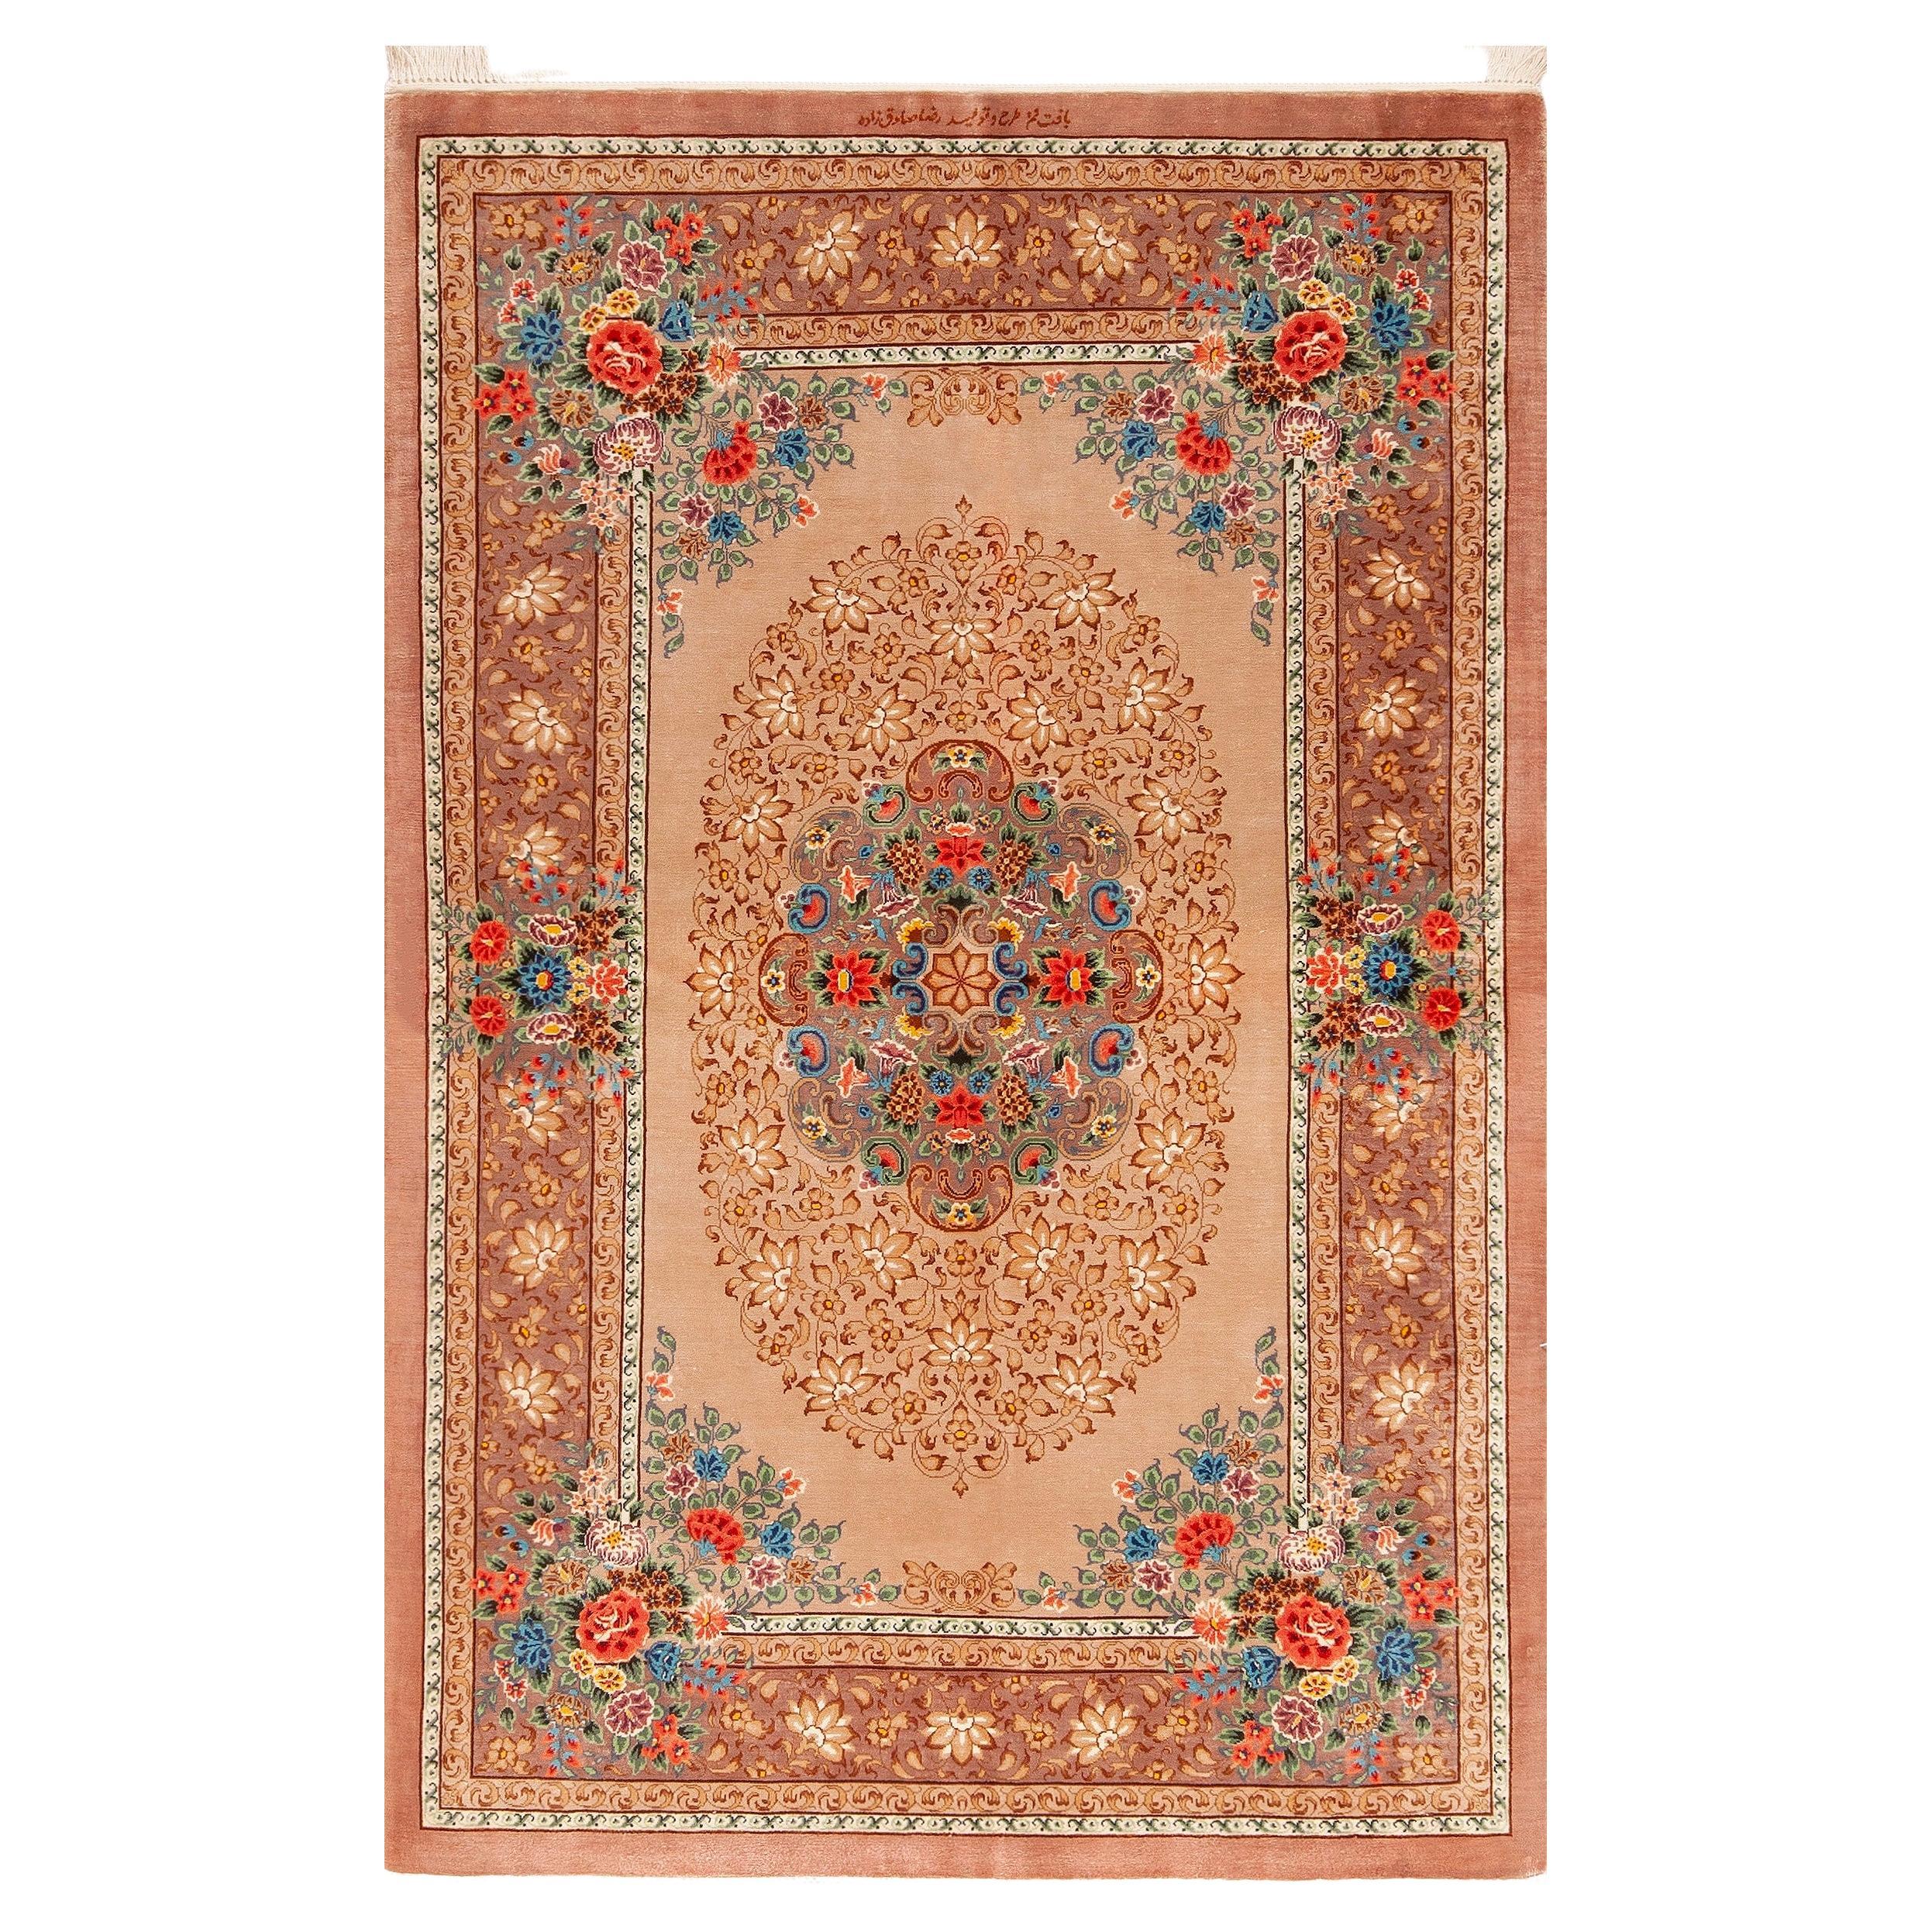 Luxurious Small Fine Floral Vintage Persian Silk Qum Rug 2'7" x 4'1" For Sale